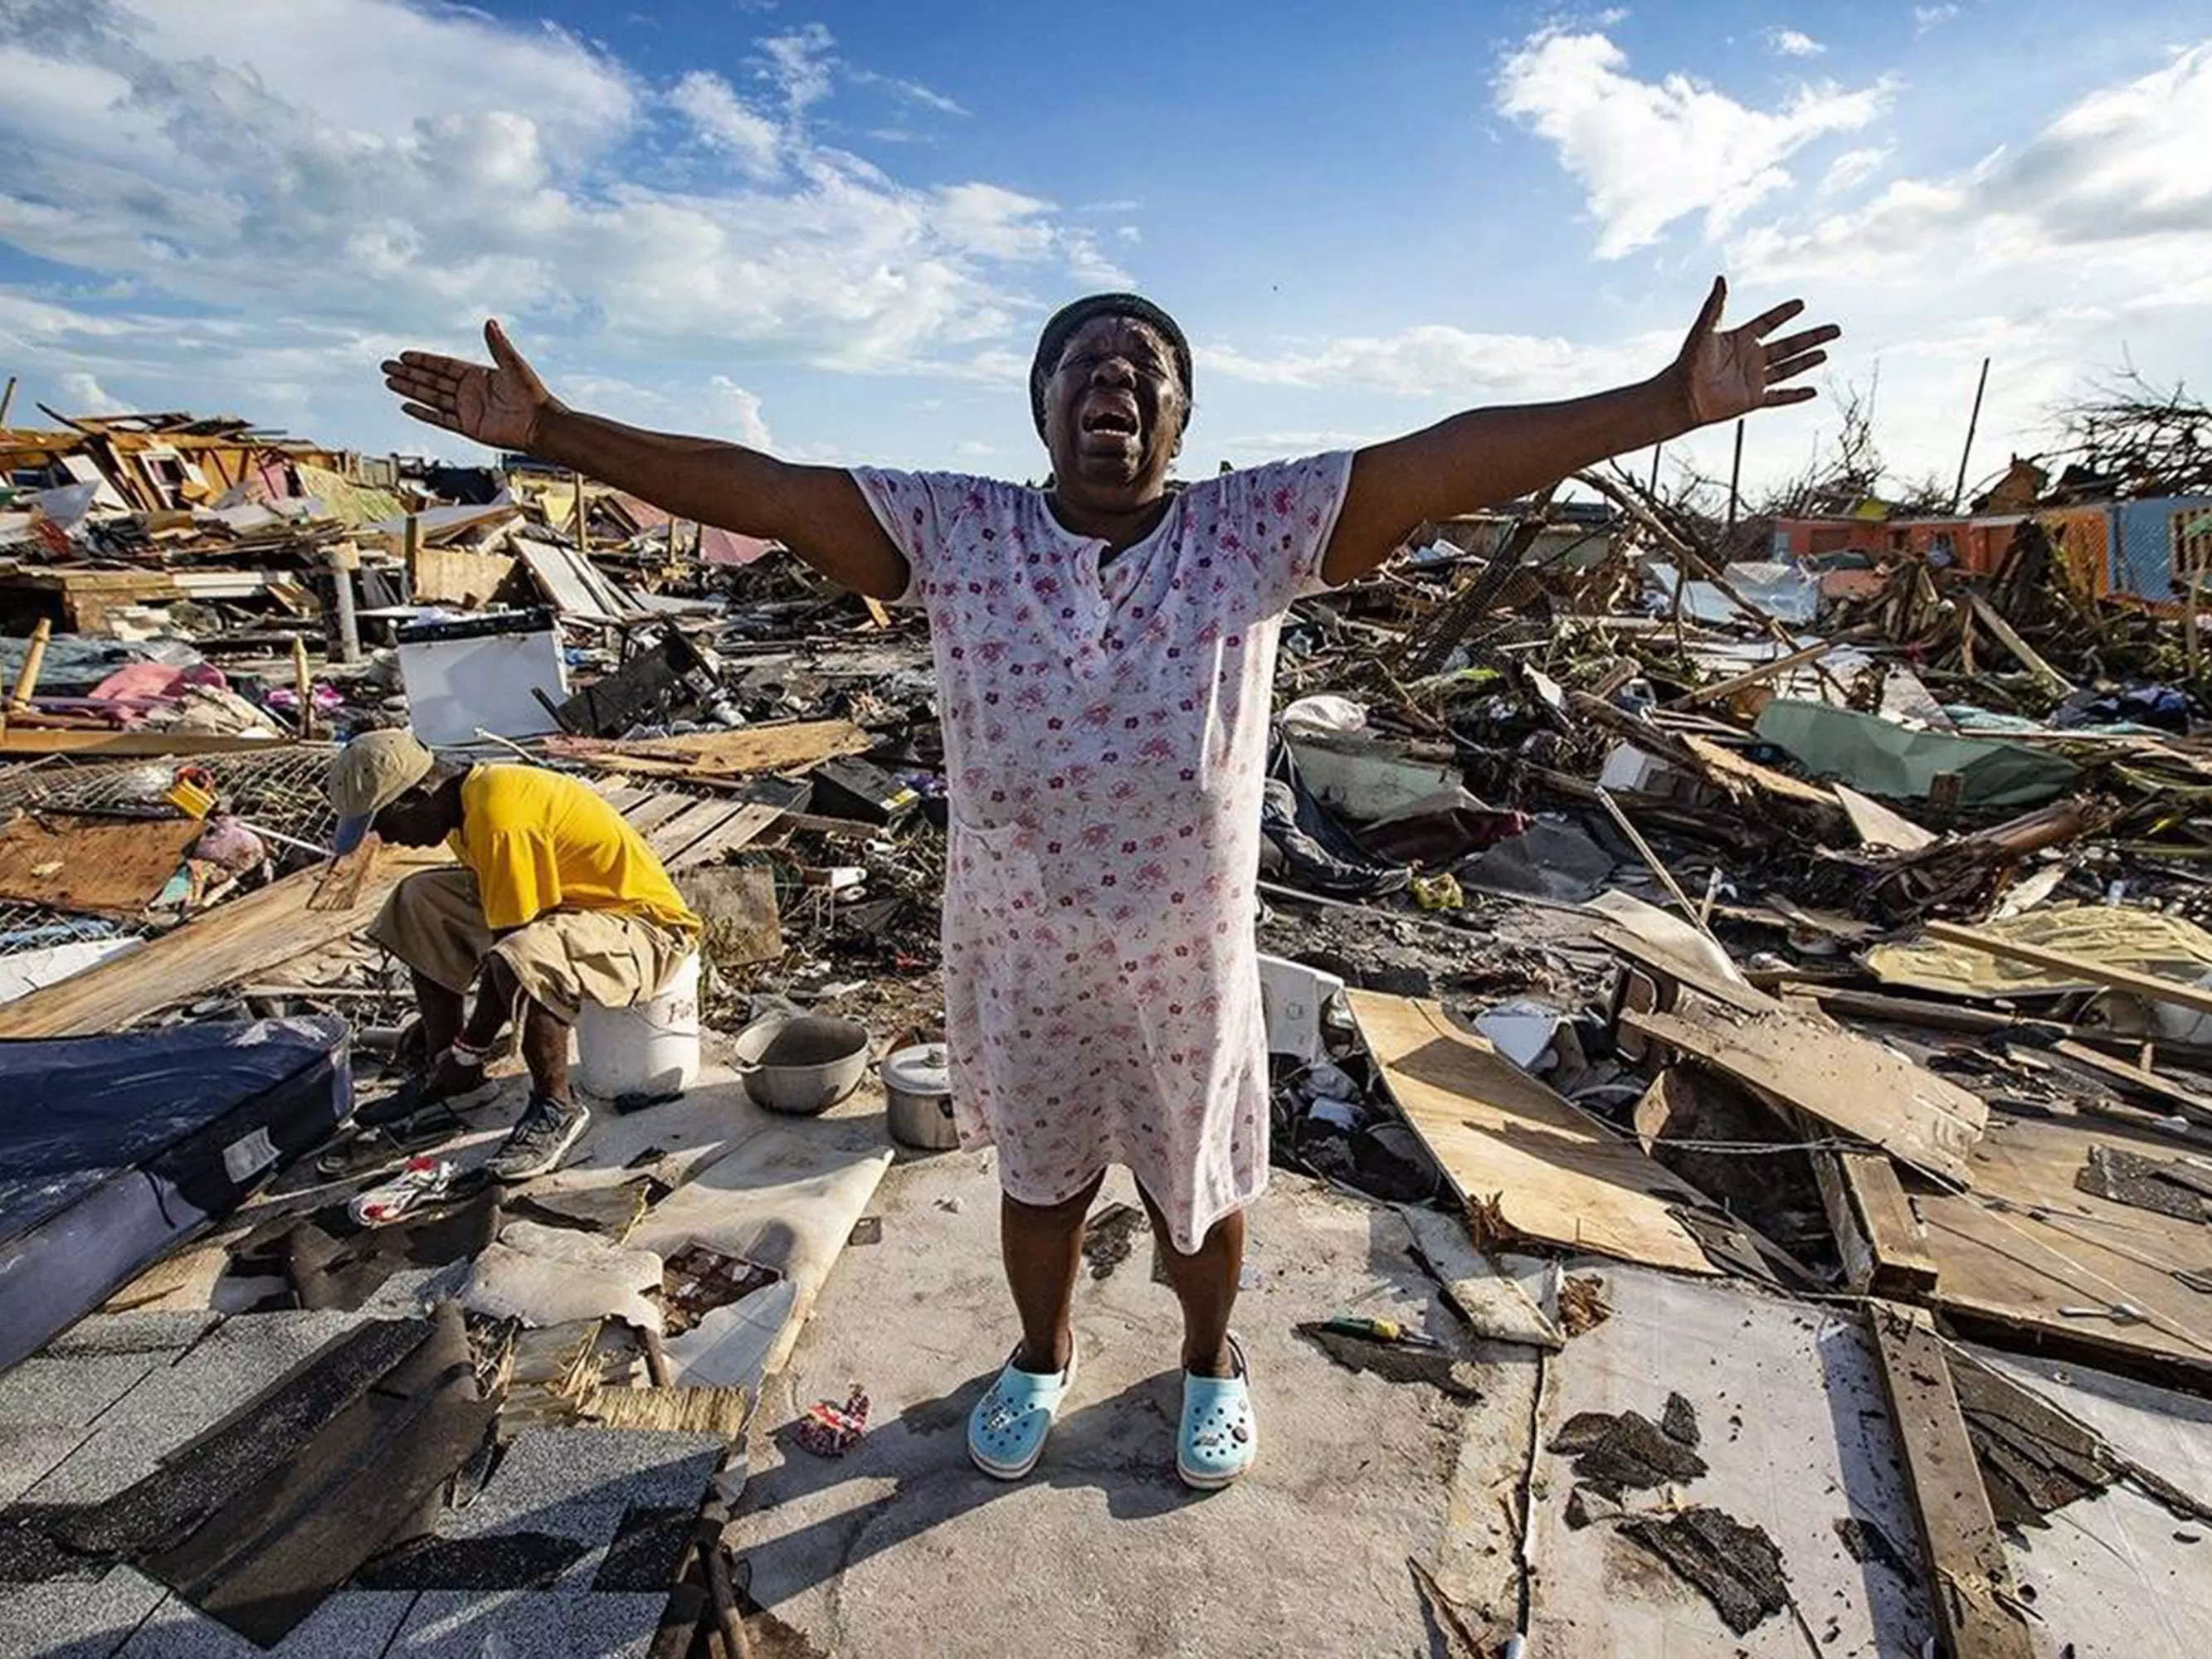 Aliana Alexis of Haiti stands on the concrete slab of what is left of her home after destruction from Hurricane Dorian in Great Abaco Island, Bahamas on Sept. 5, 2019.